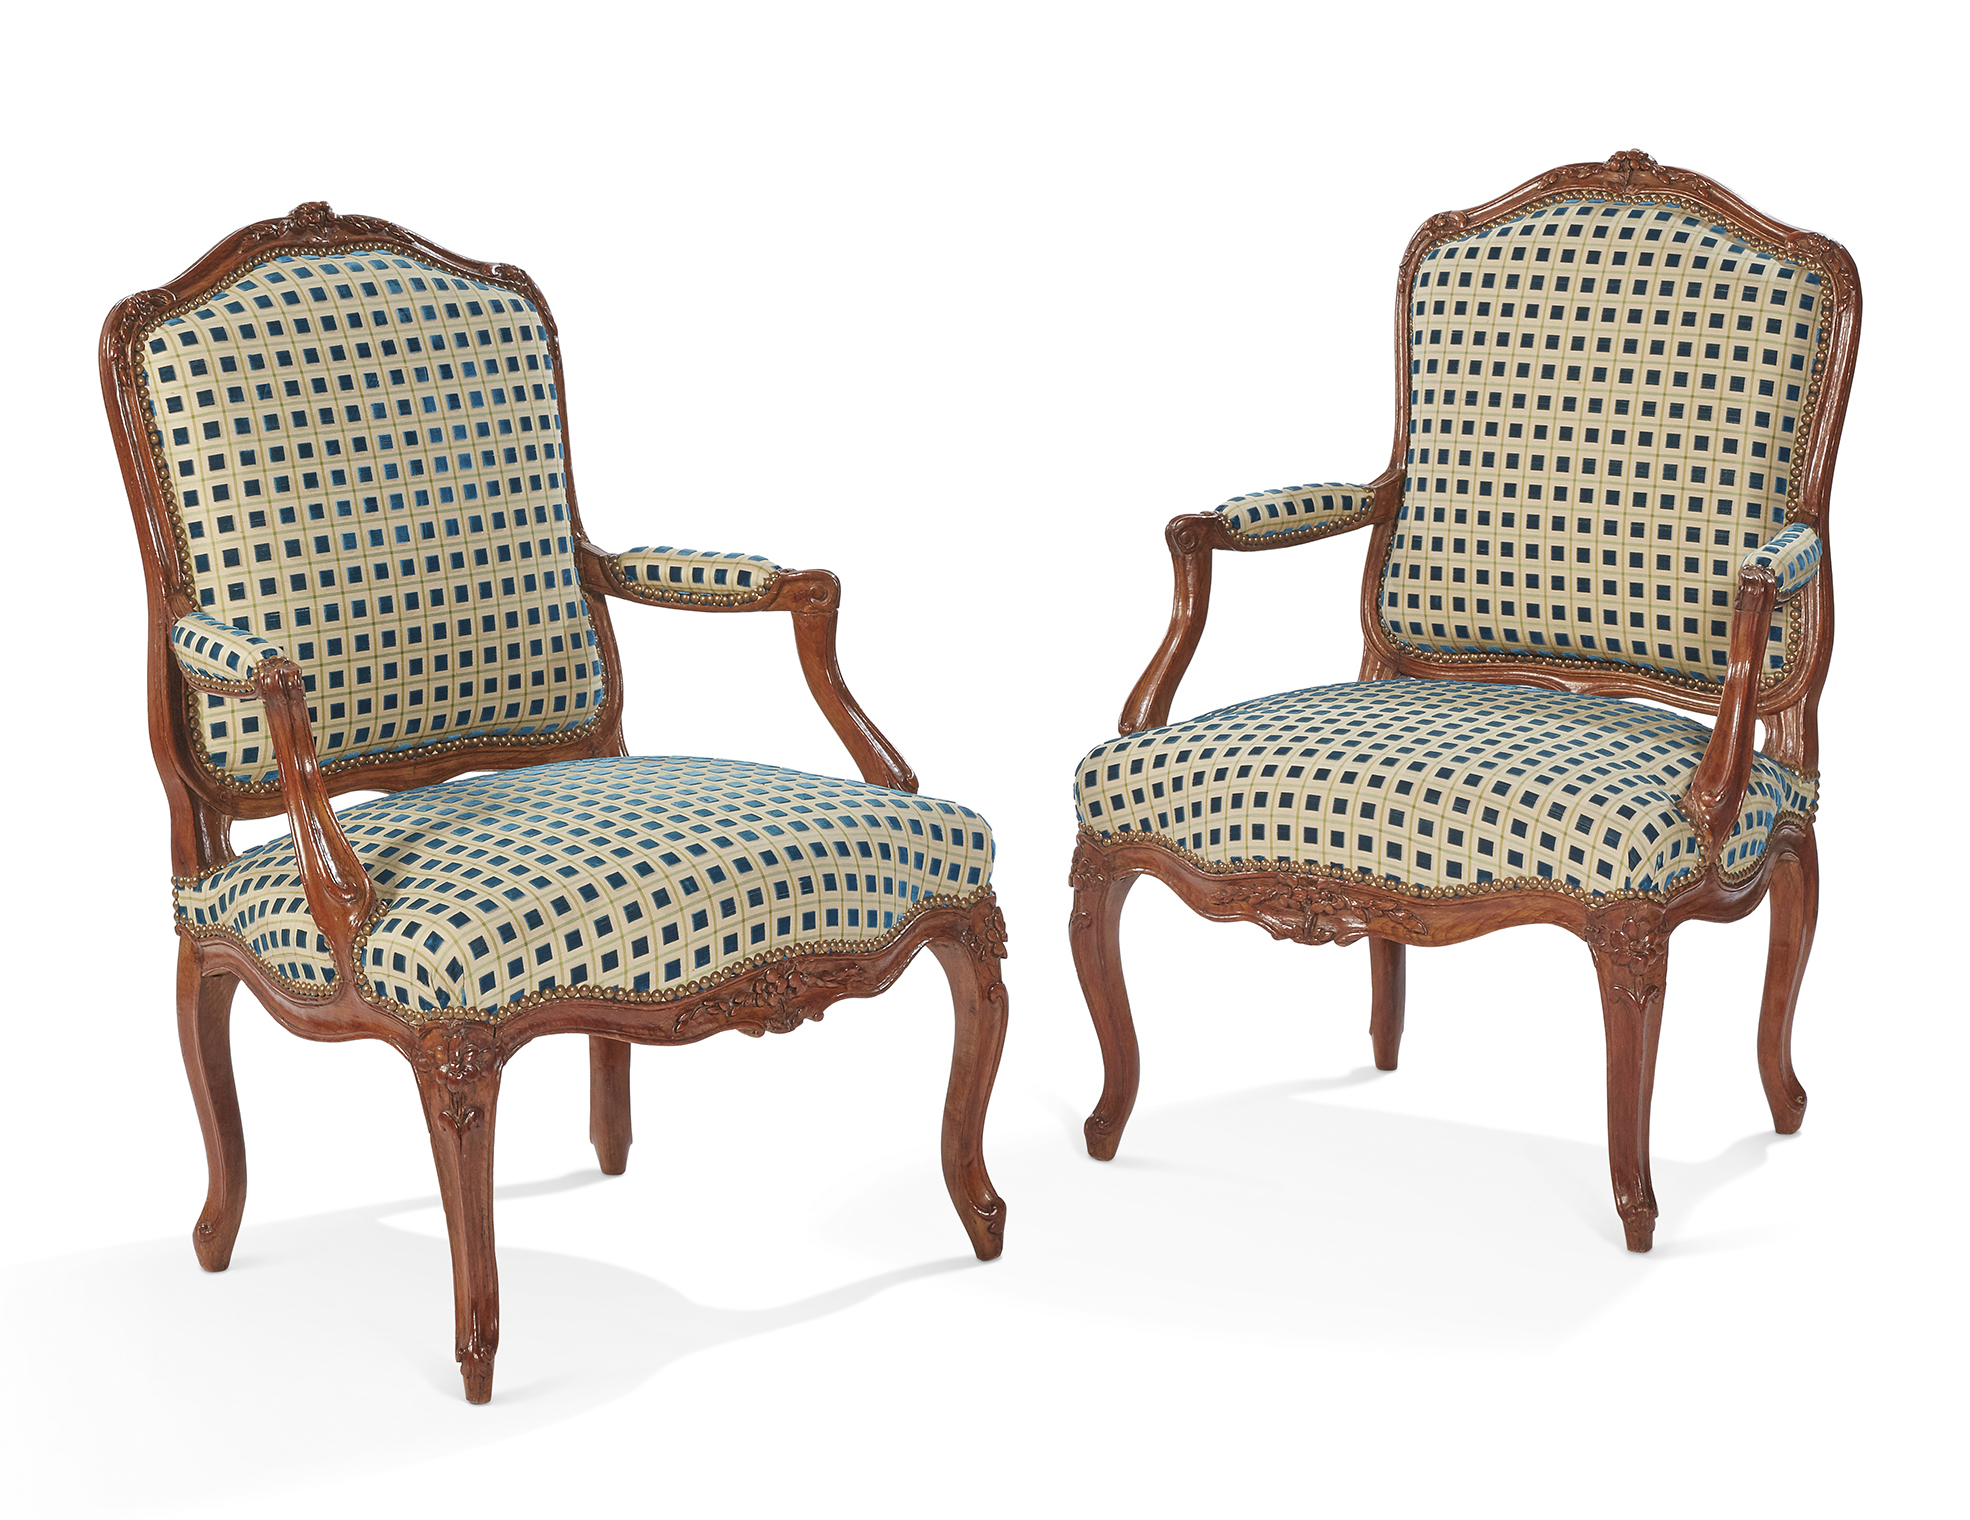 Pair of French, Louis XV period fauteuils